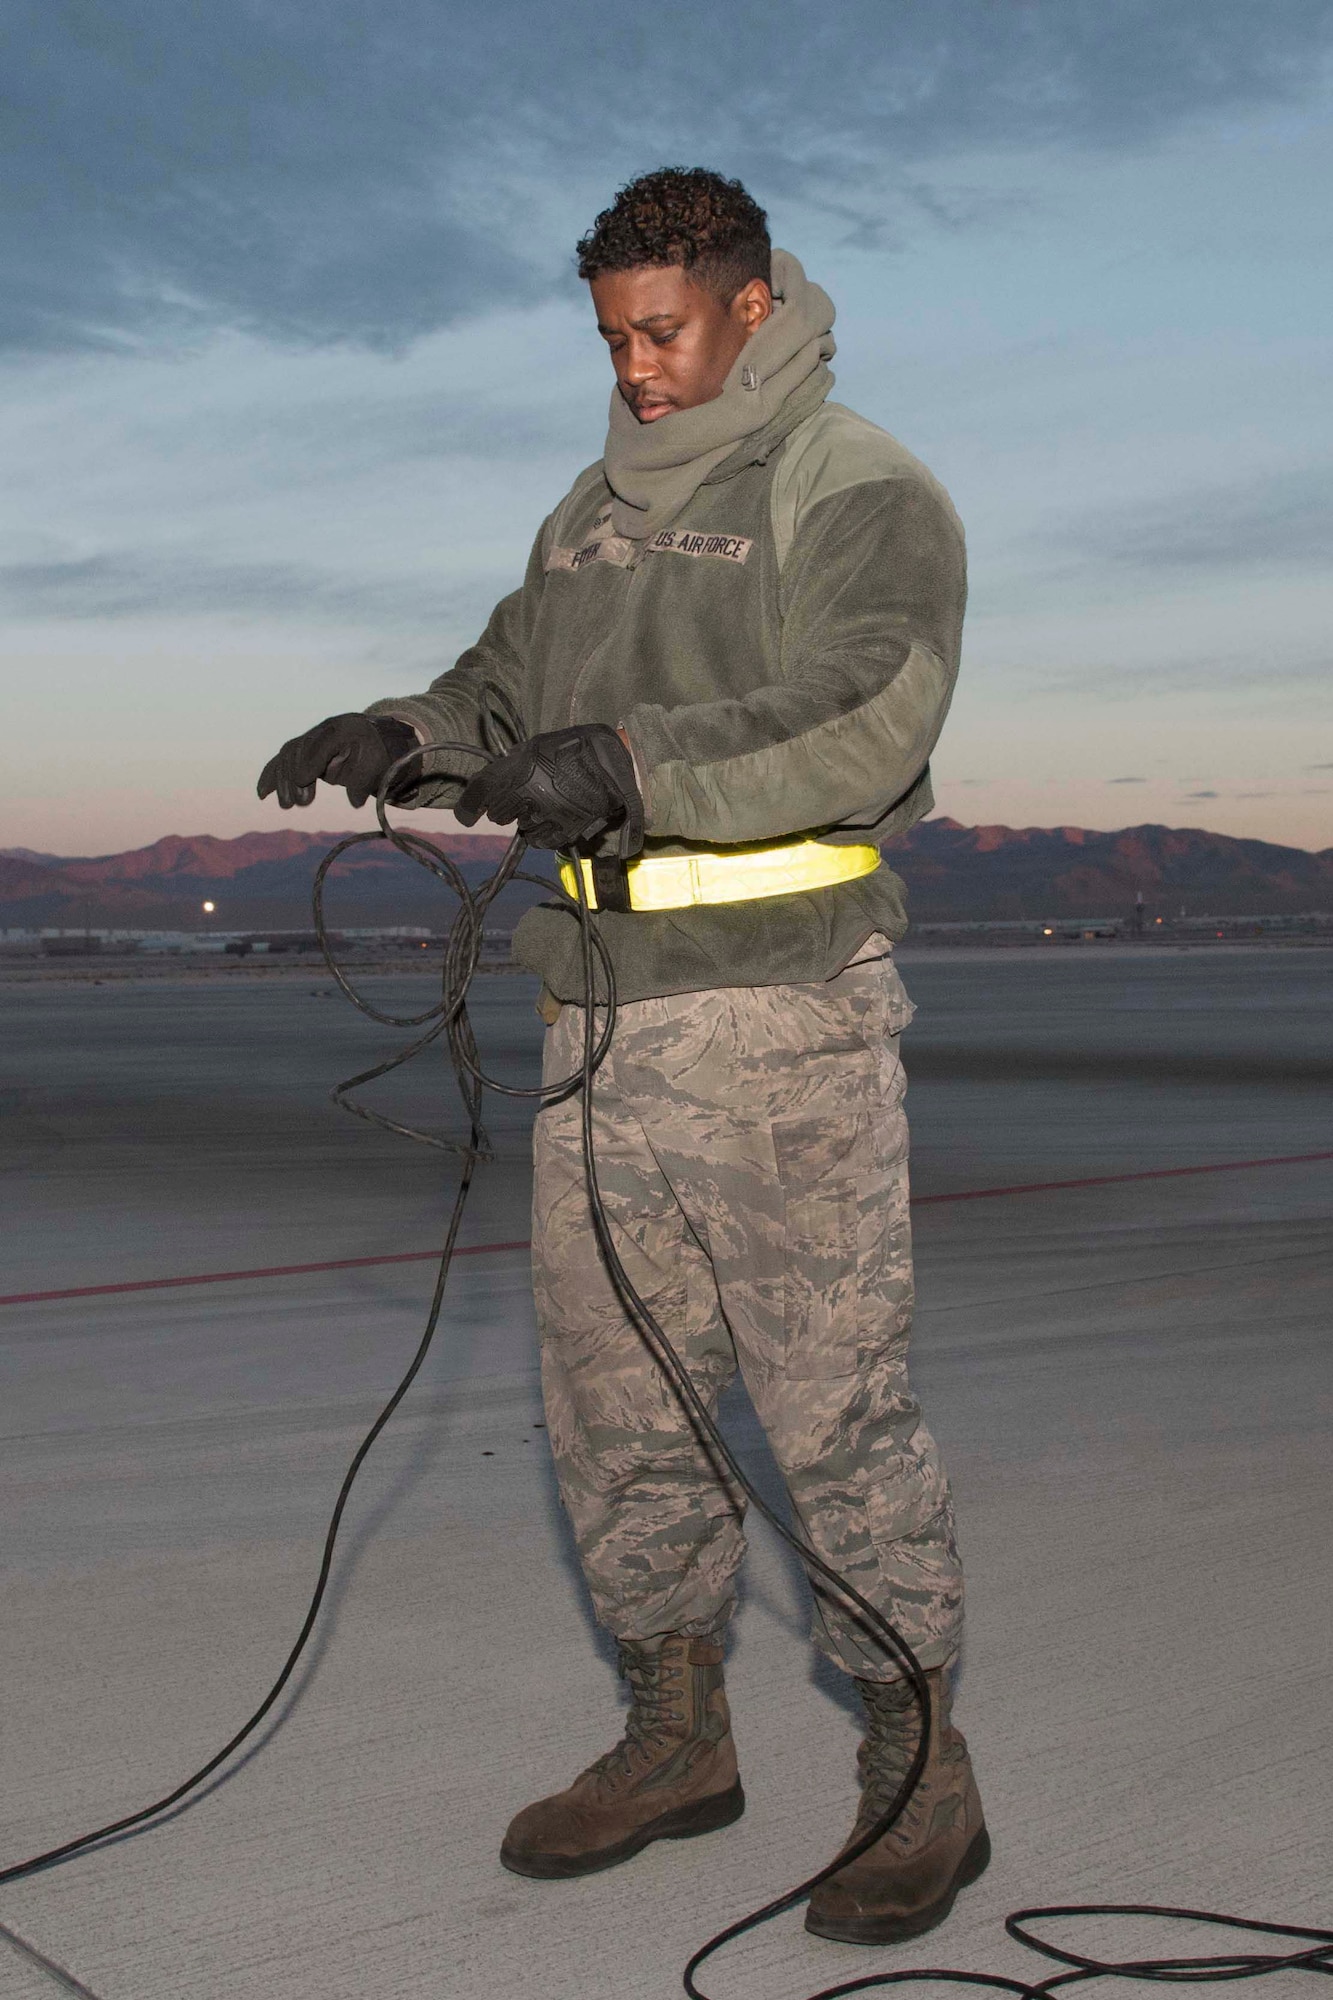 U.S. Air Force Staff Sgt. Jamall Fryer, 11th Aircraft Maintenance Unit crew chief, prepares for an early morning sortie at Nellis Air Force Base, Nevada, Dec. 11, 2018.  Fryer, an active-duty Airman, served alongside Reserve Citizen Airman during the biannual Weapons School Integration exercise.  The two components regularly work together as part of the total force integration model. (U.S. Air Force photo by Master Sgt. Ted Daigle)